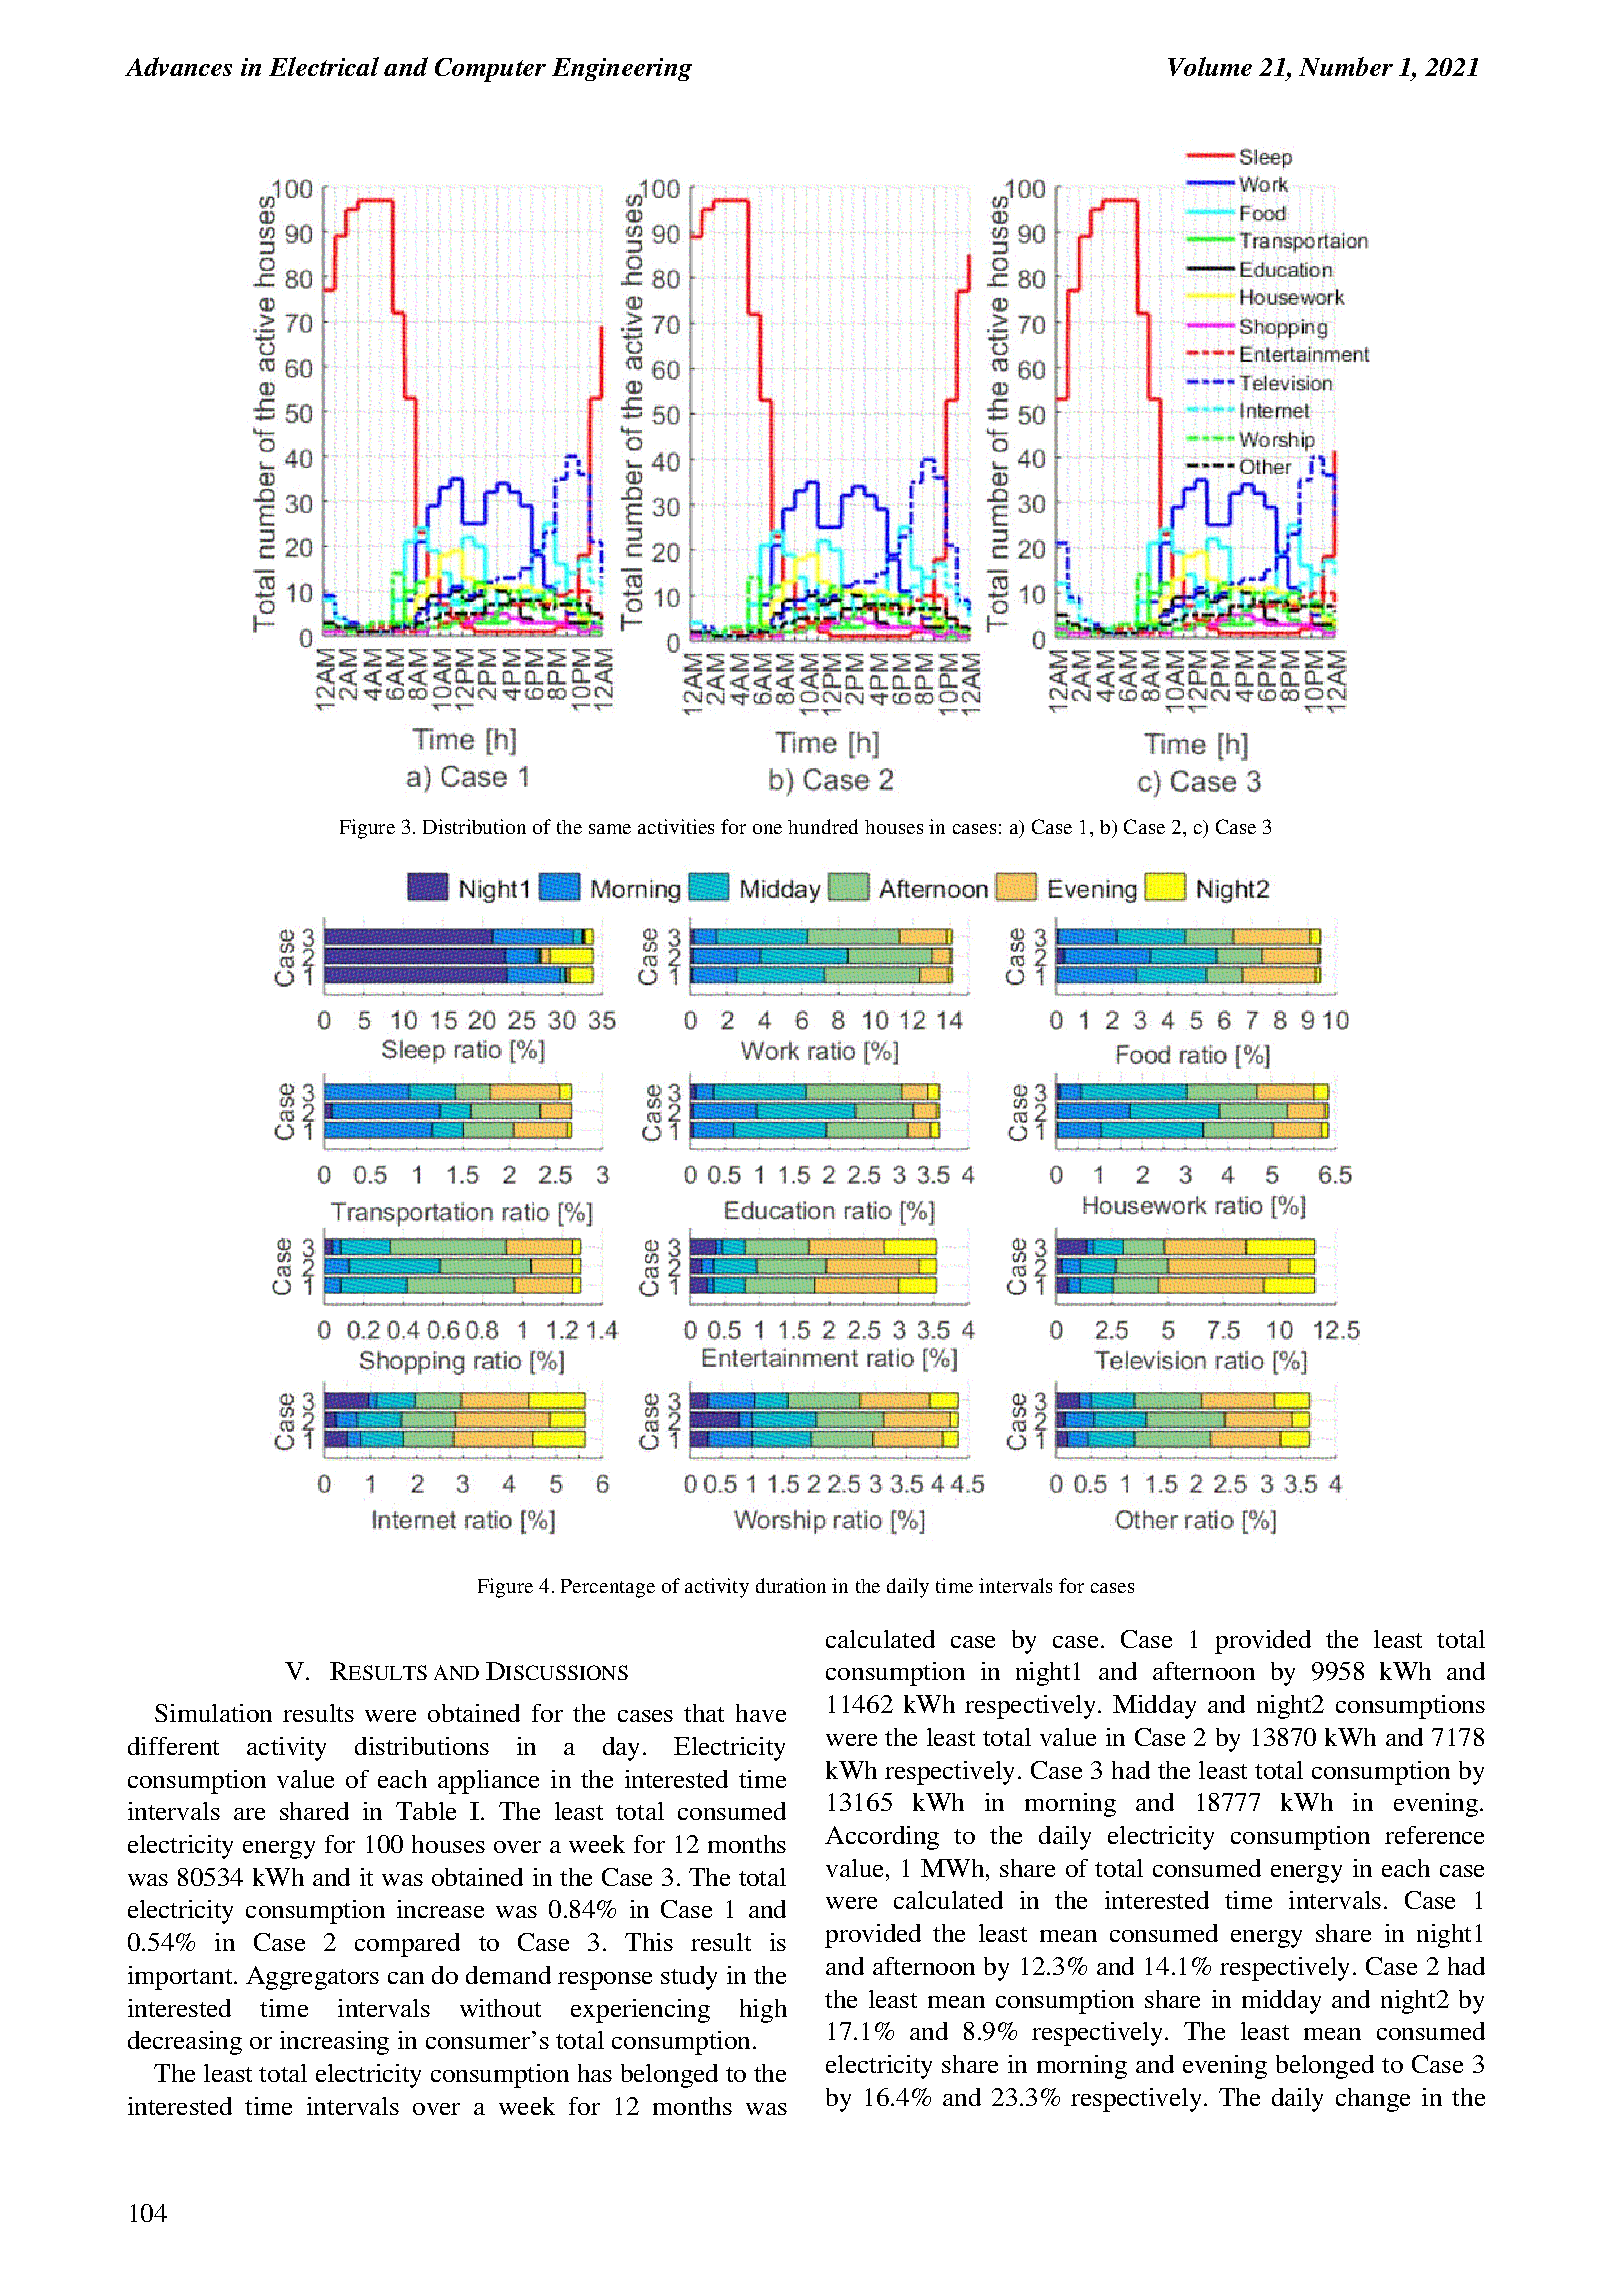 PDF Quickview for paper with DOI:10.4316/AECE.2021.01011